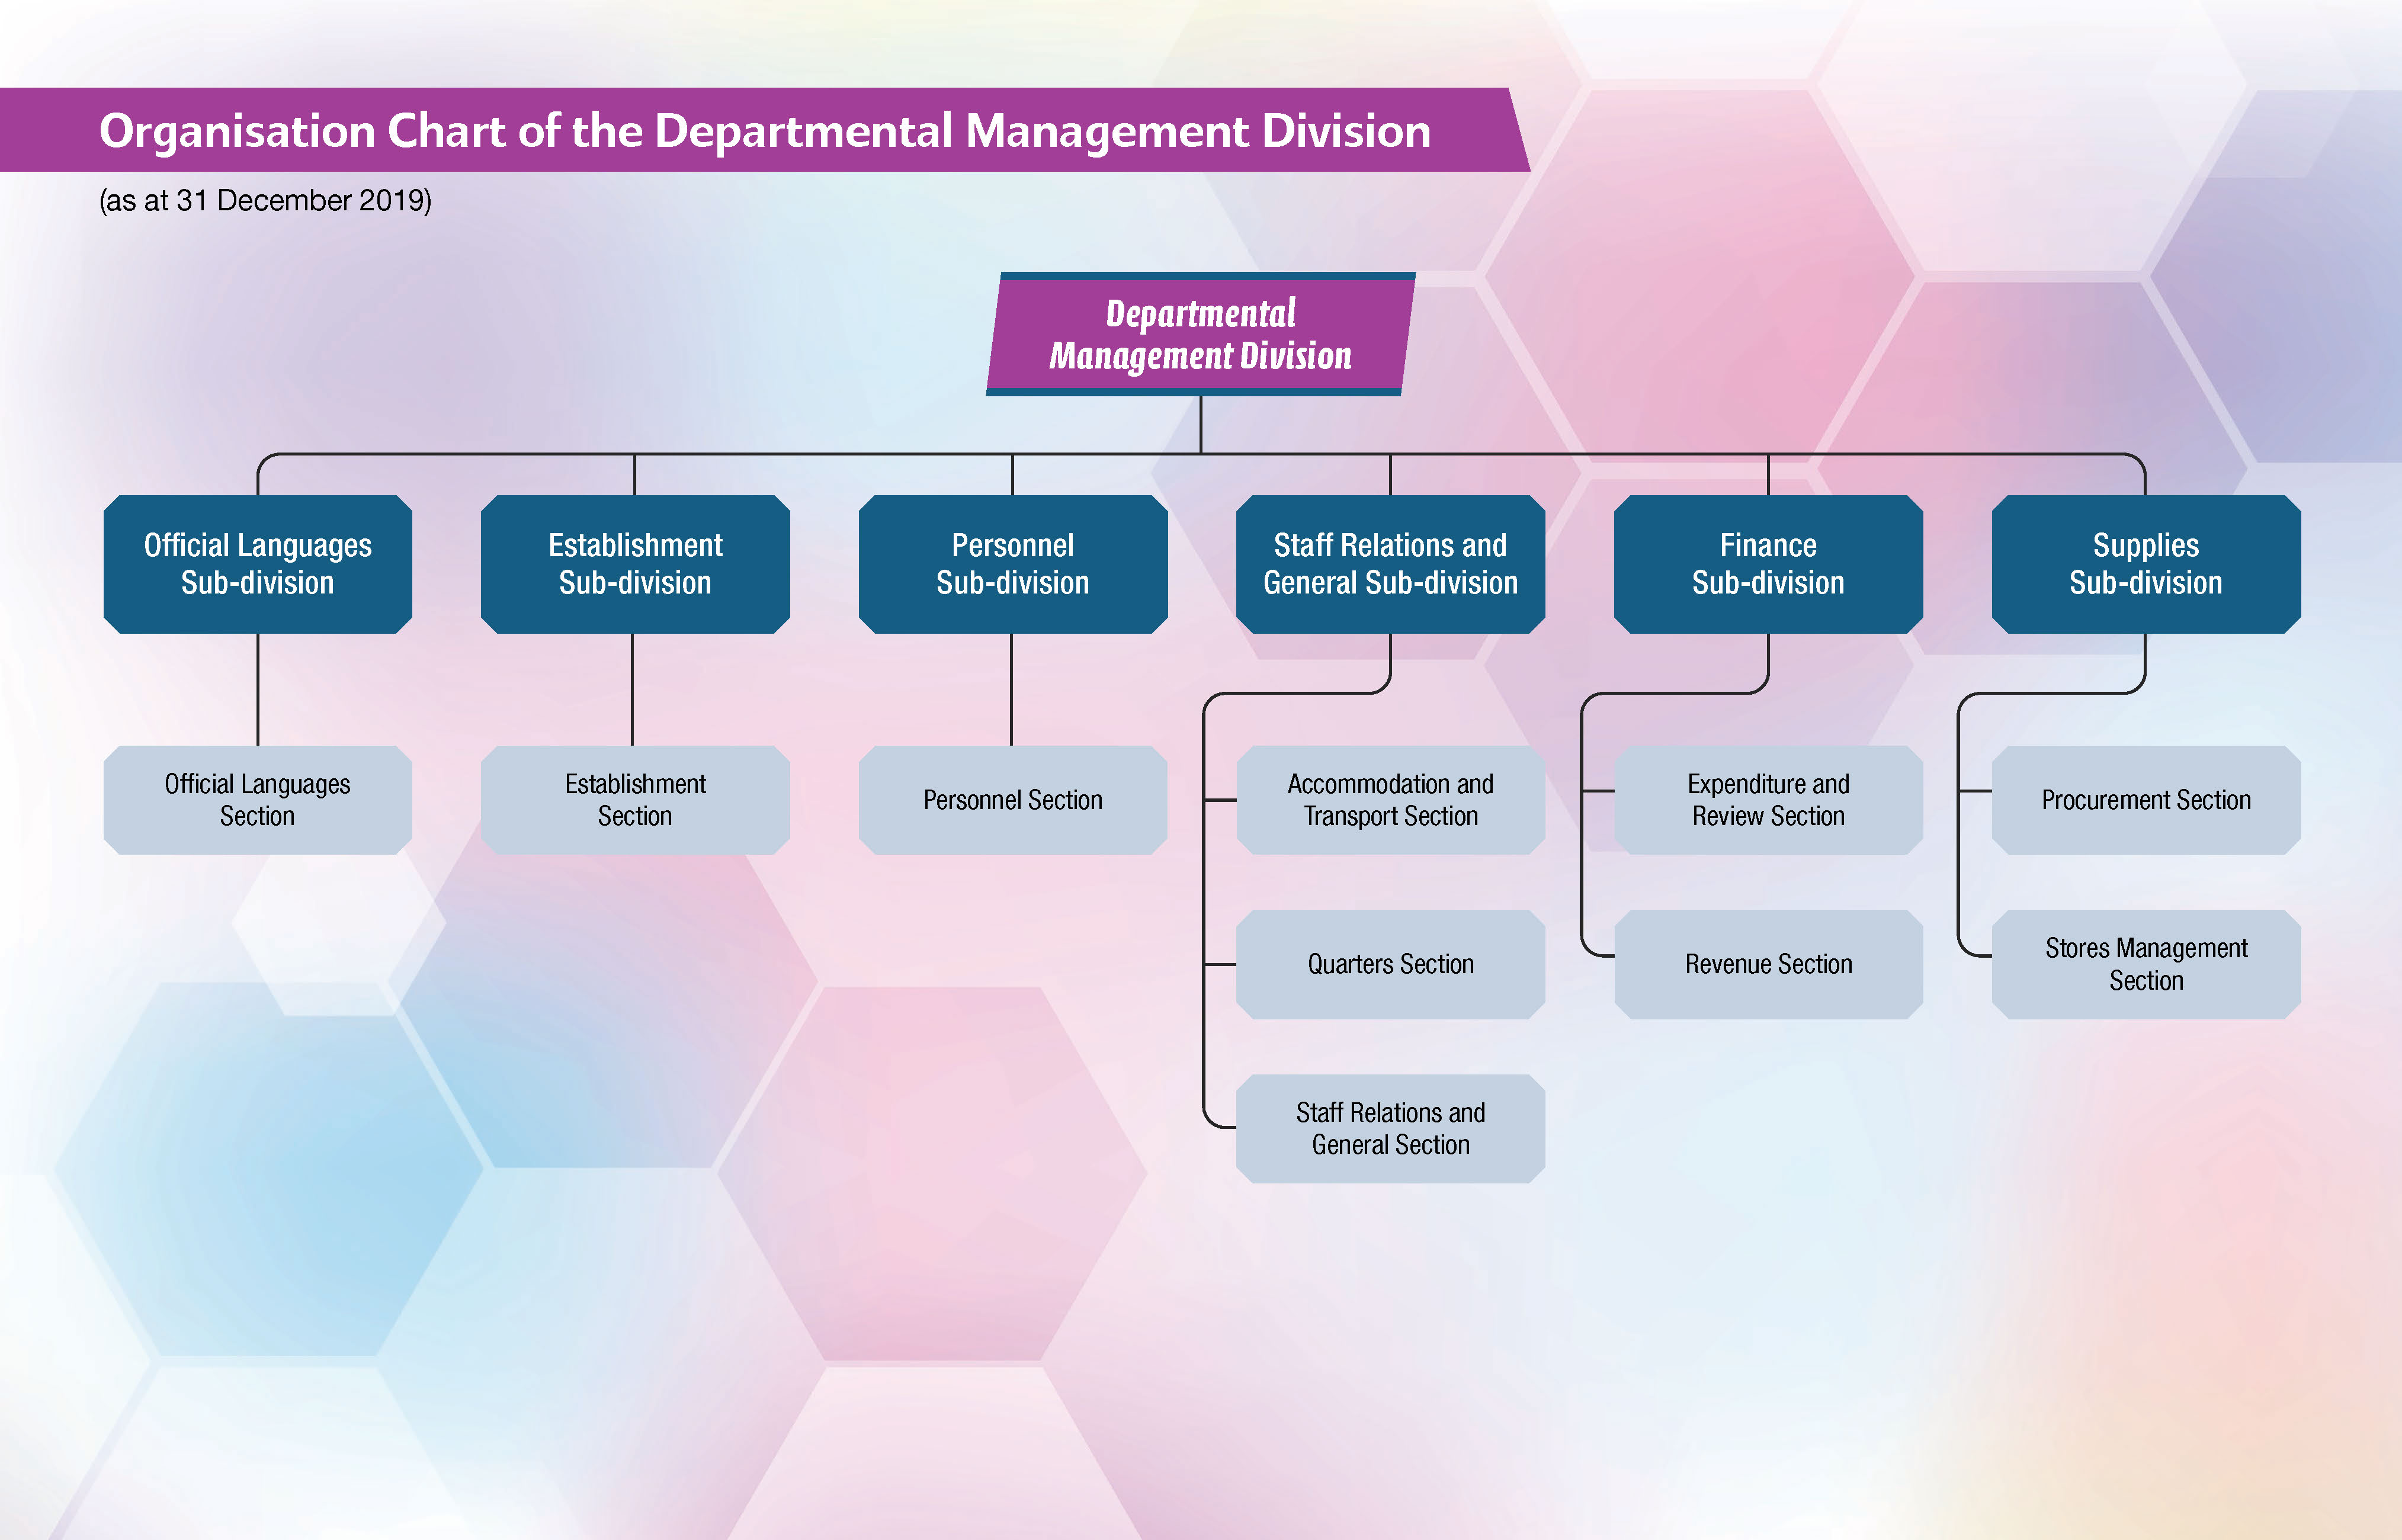 Organisation Chart of the Departmental Management Division